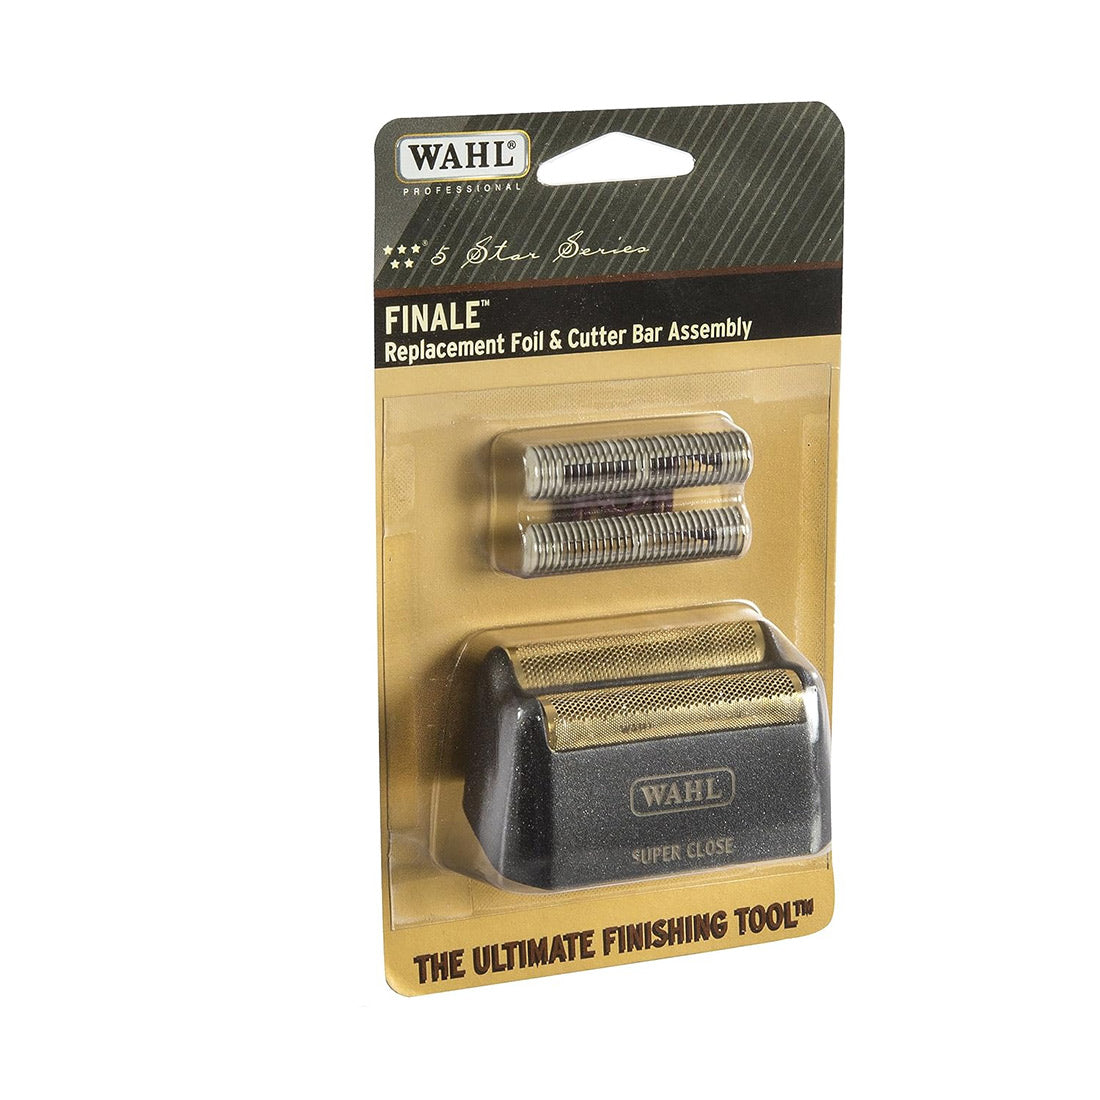 Wahl 5-Star Finale Replacement Foil and Cutter Bar Assembly #7043 Package